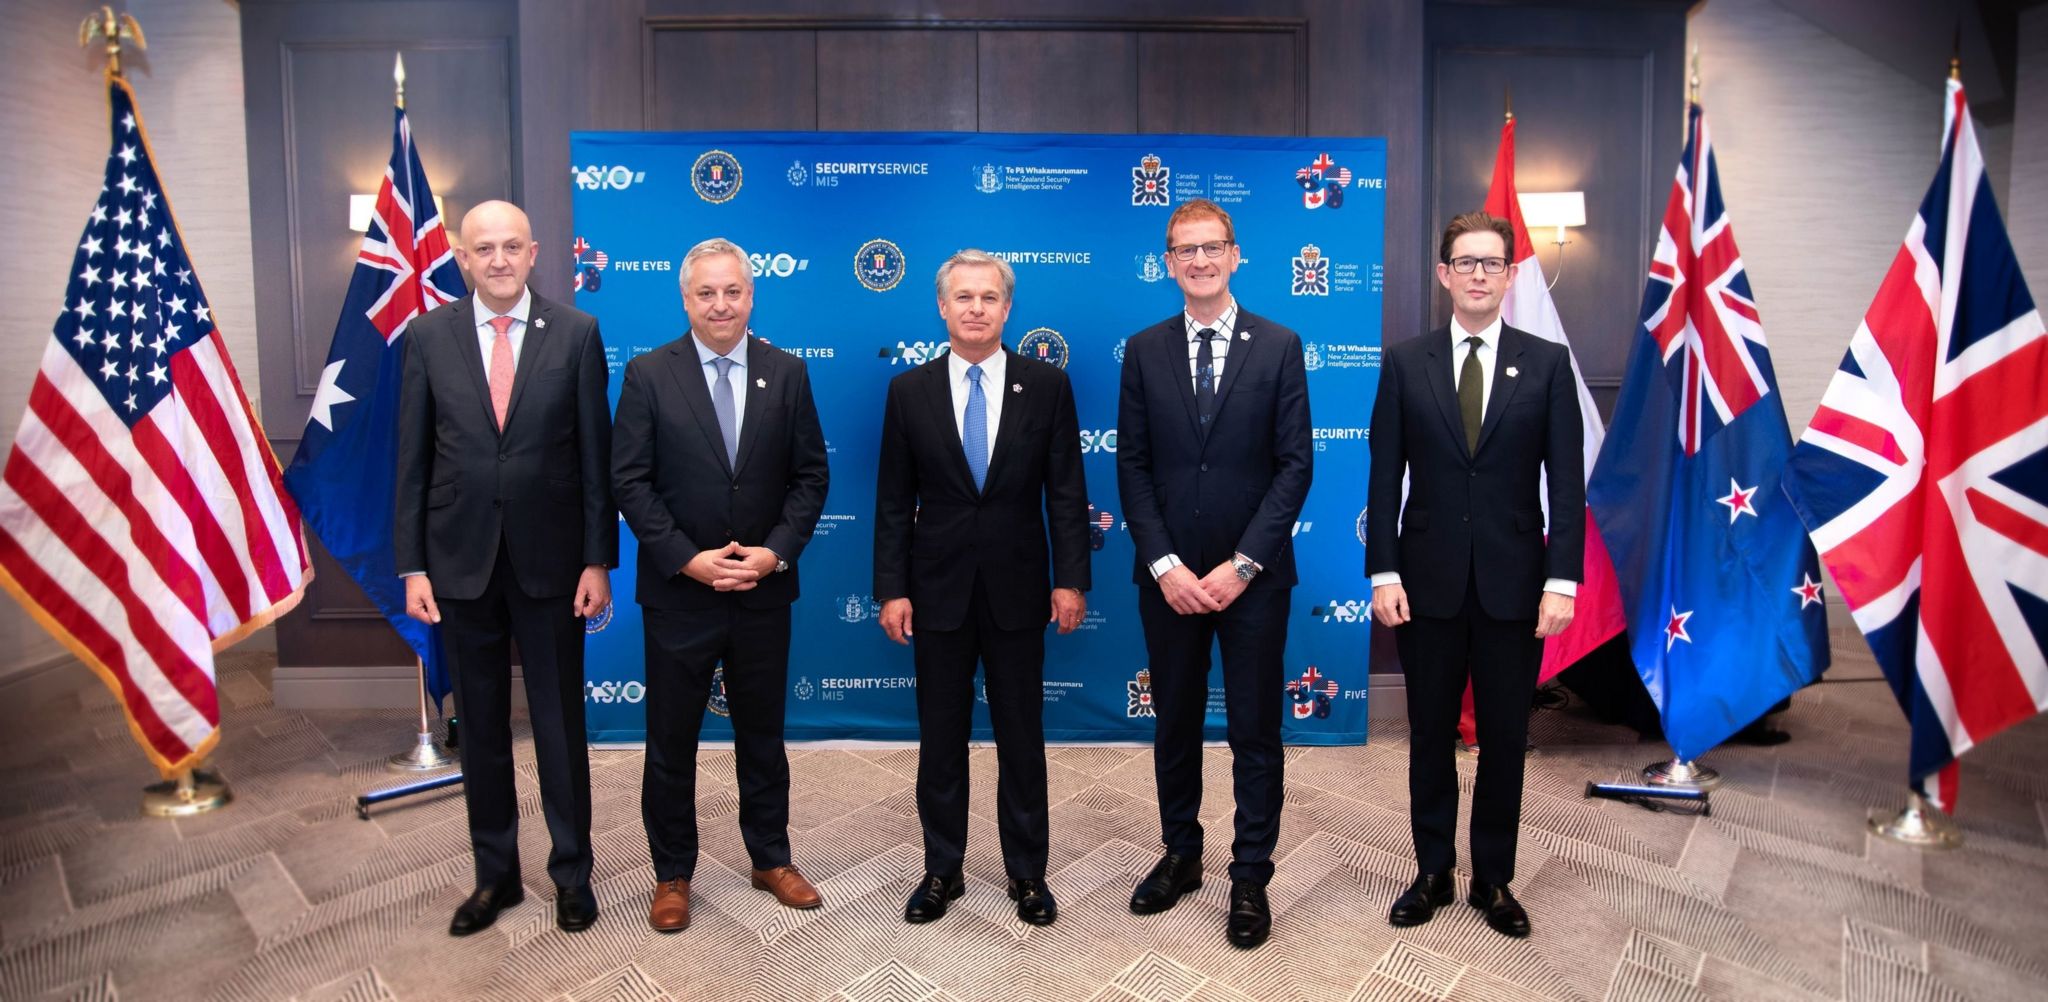 The heads of US, UK, Australian, Canadian and New Zealand security agencies stand in a row flanked by flags.